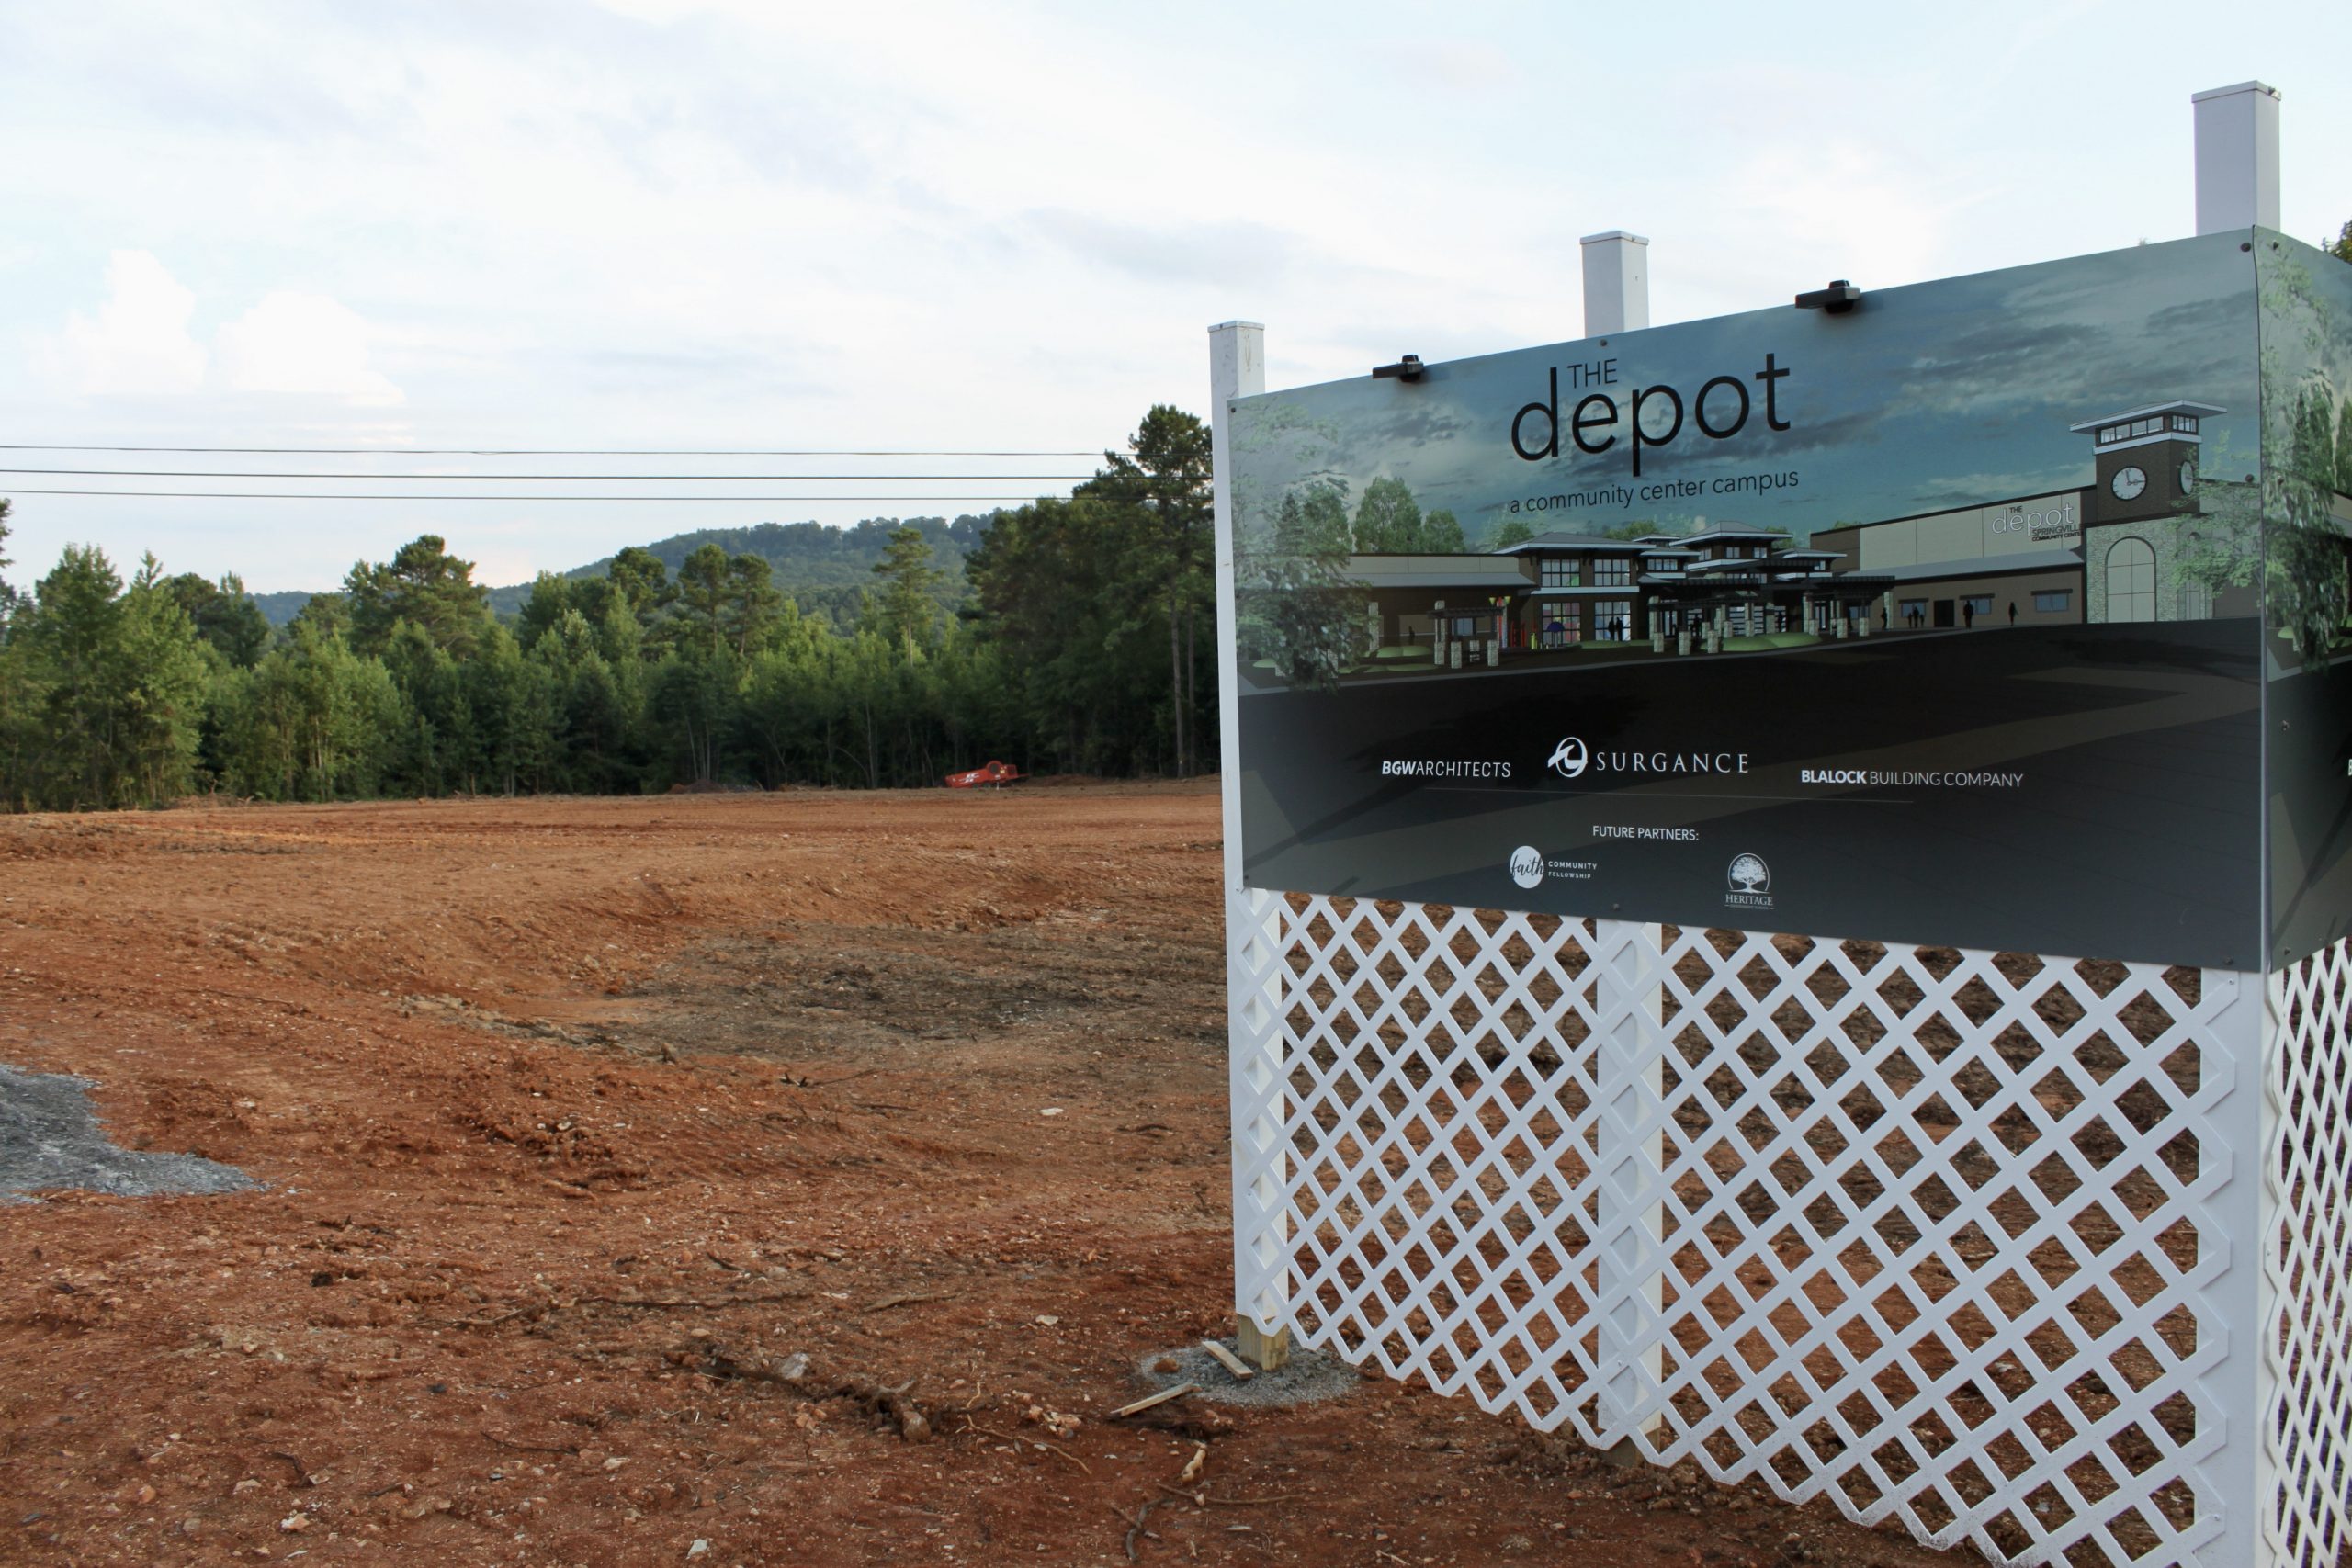 Developers of 'The Depot' in Springville hope to bring community together